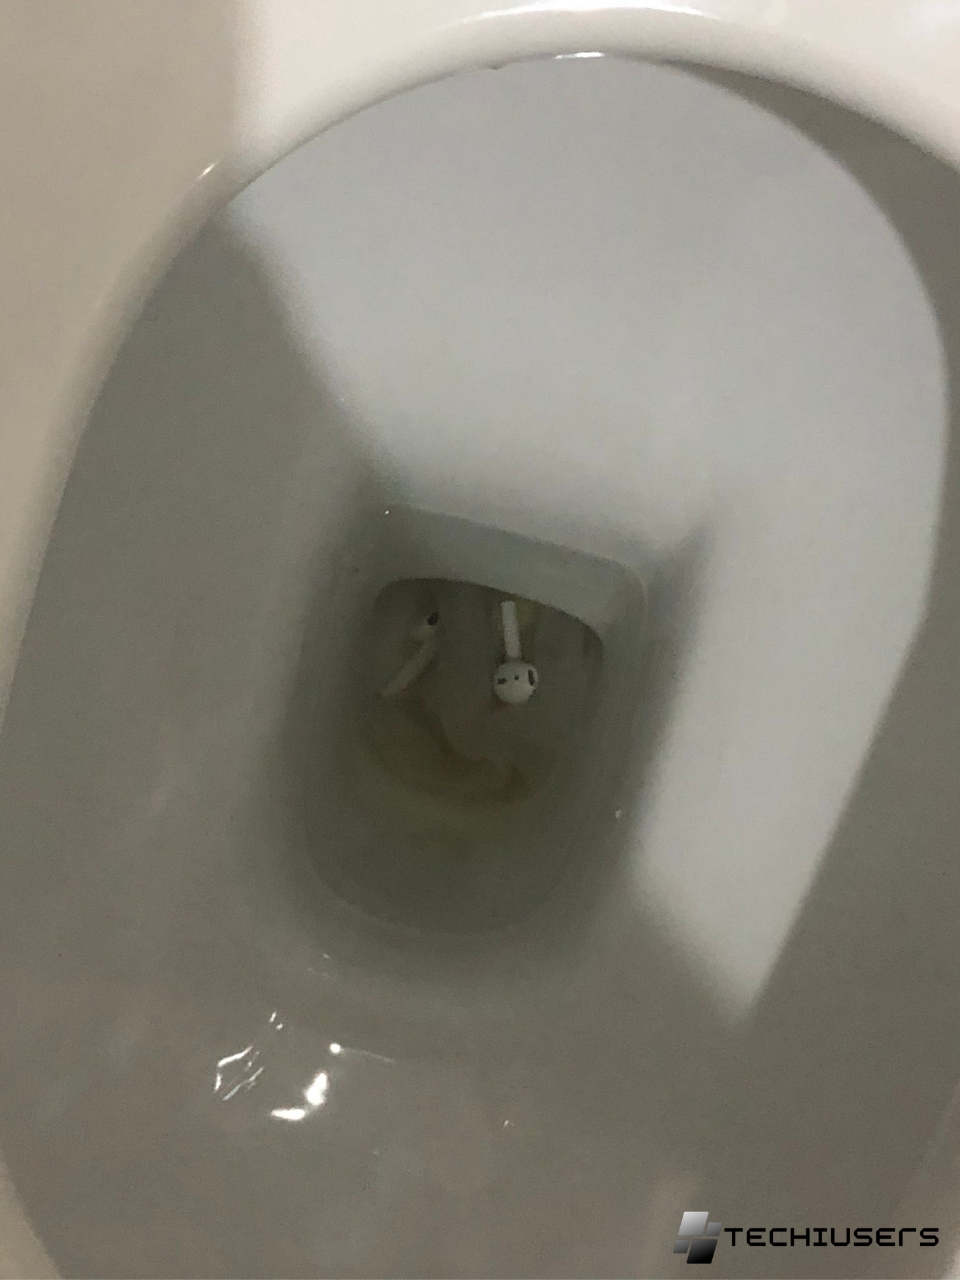 I Dropped my Airpods in the Toilet